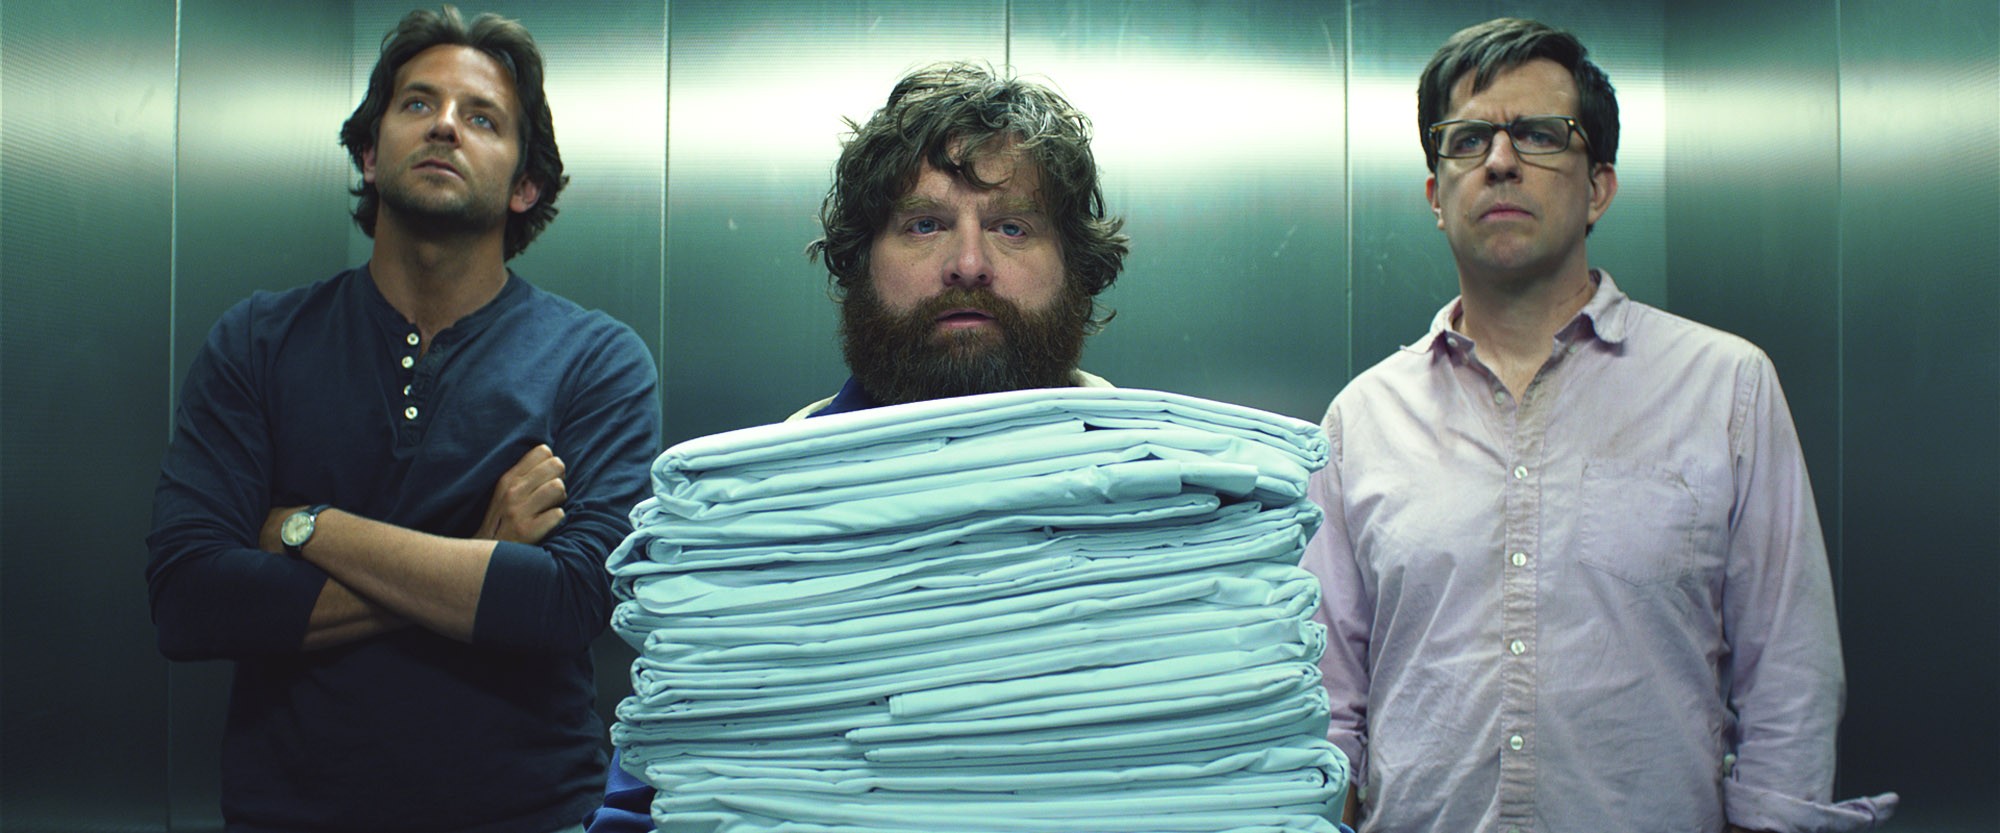 Bradley Cooper, Zach Galifianakis and Ed Helms in Warner Bros. Pictures' The Hangover Part III (2013)